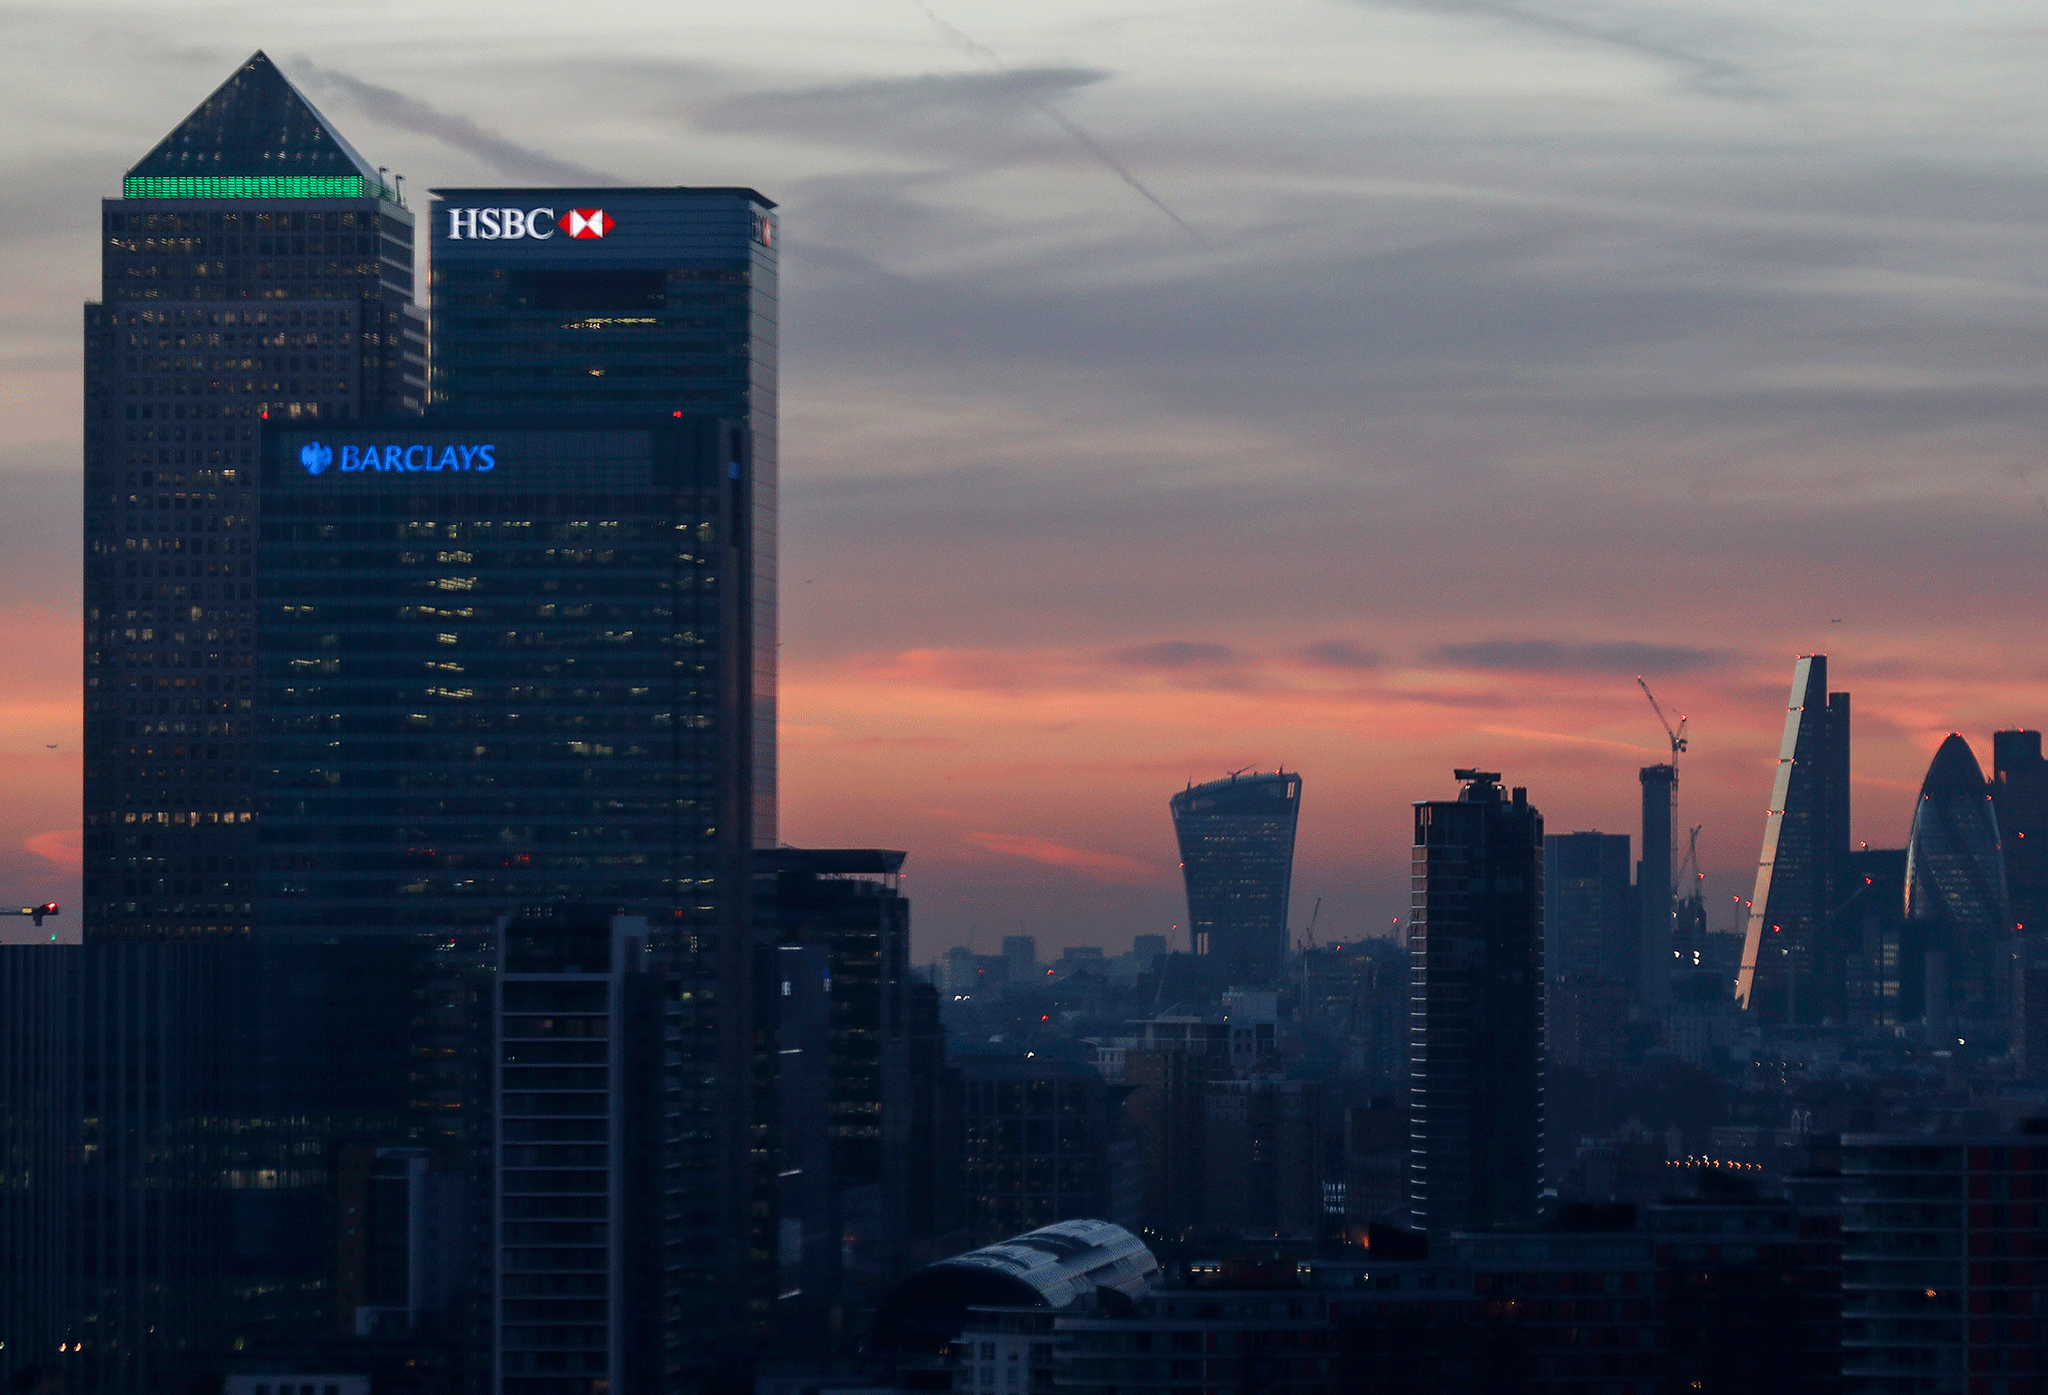 The EU fears its regulators, after Brexit, will not have same ability to watch over the City of London